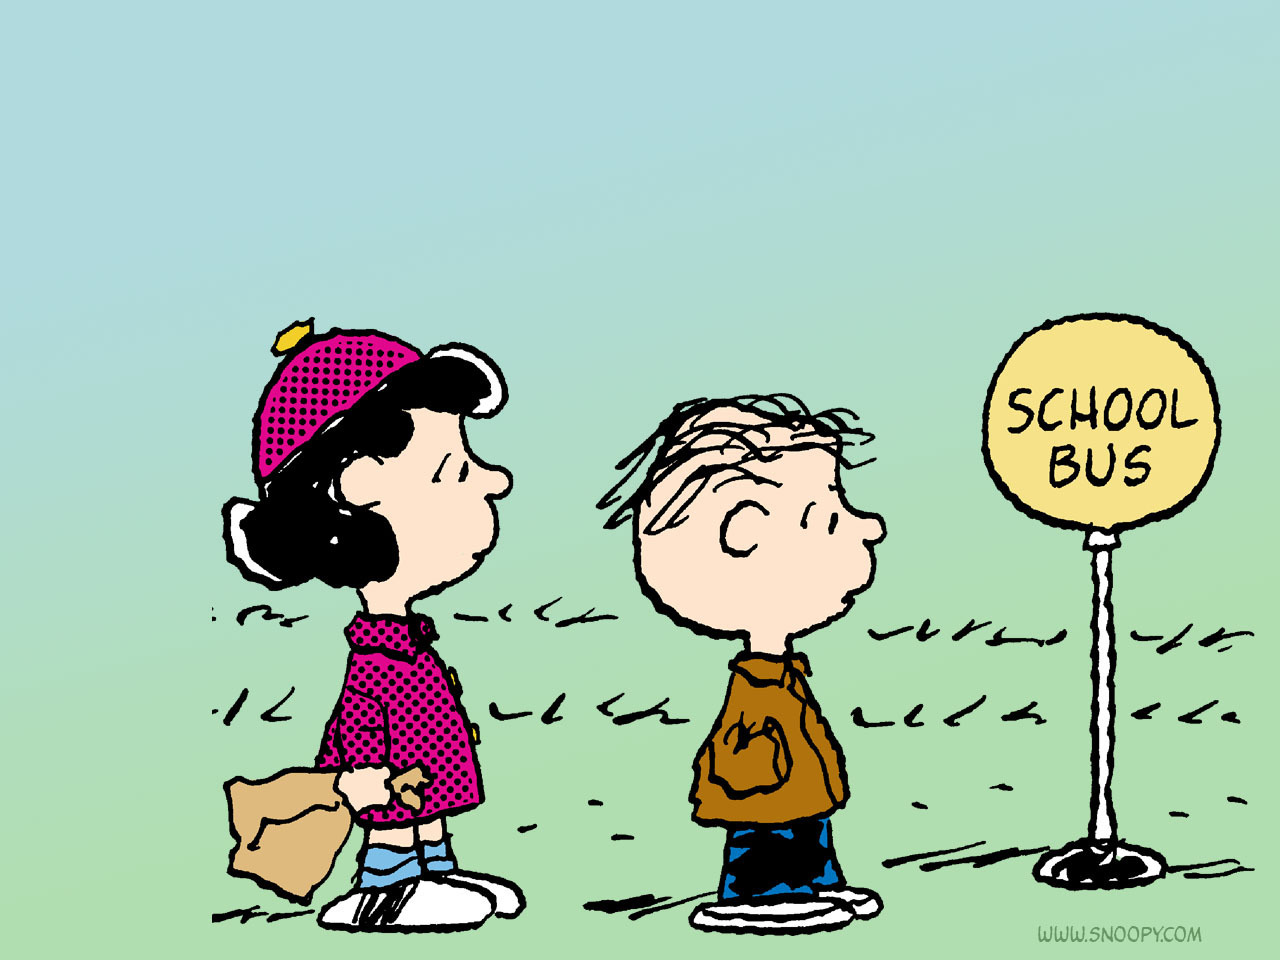 school bus linus and lucy   Peanuts Wallpaper 6273388 1280x960